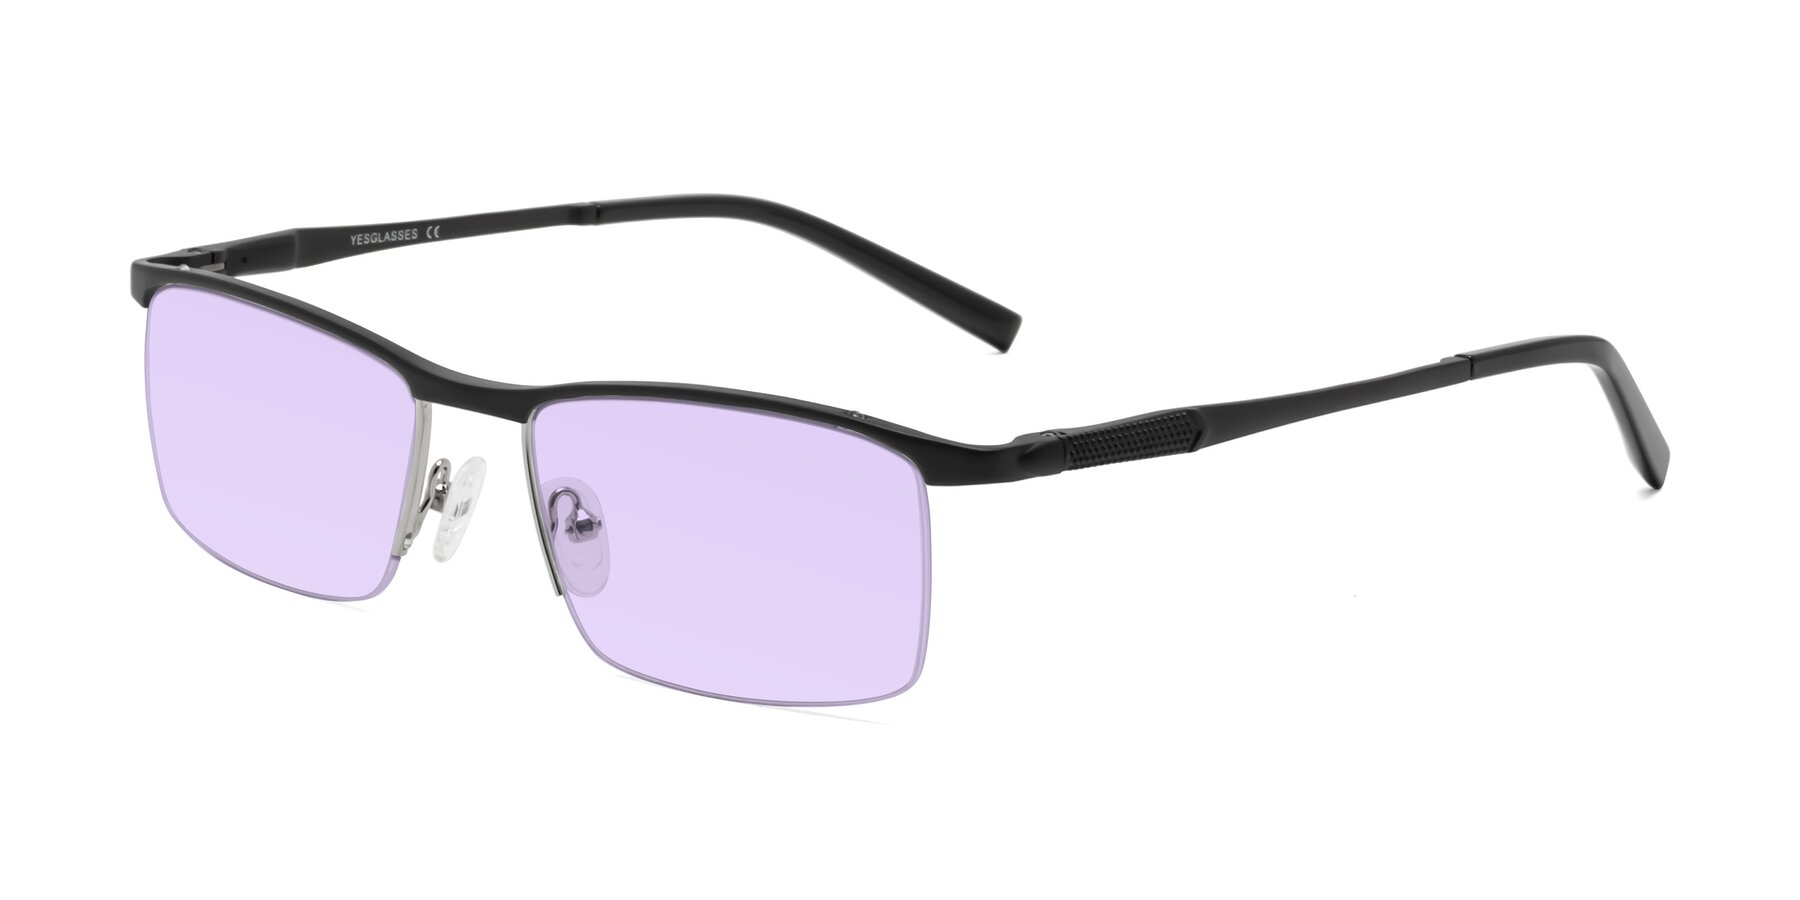 Angle of CX6303 in Black with Light Purple Tinted Lenses